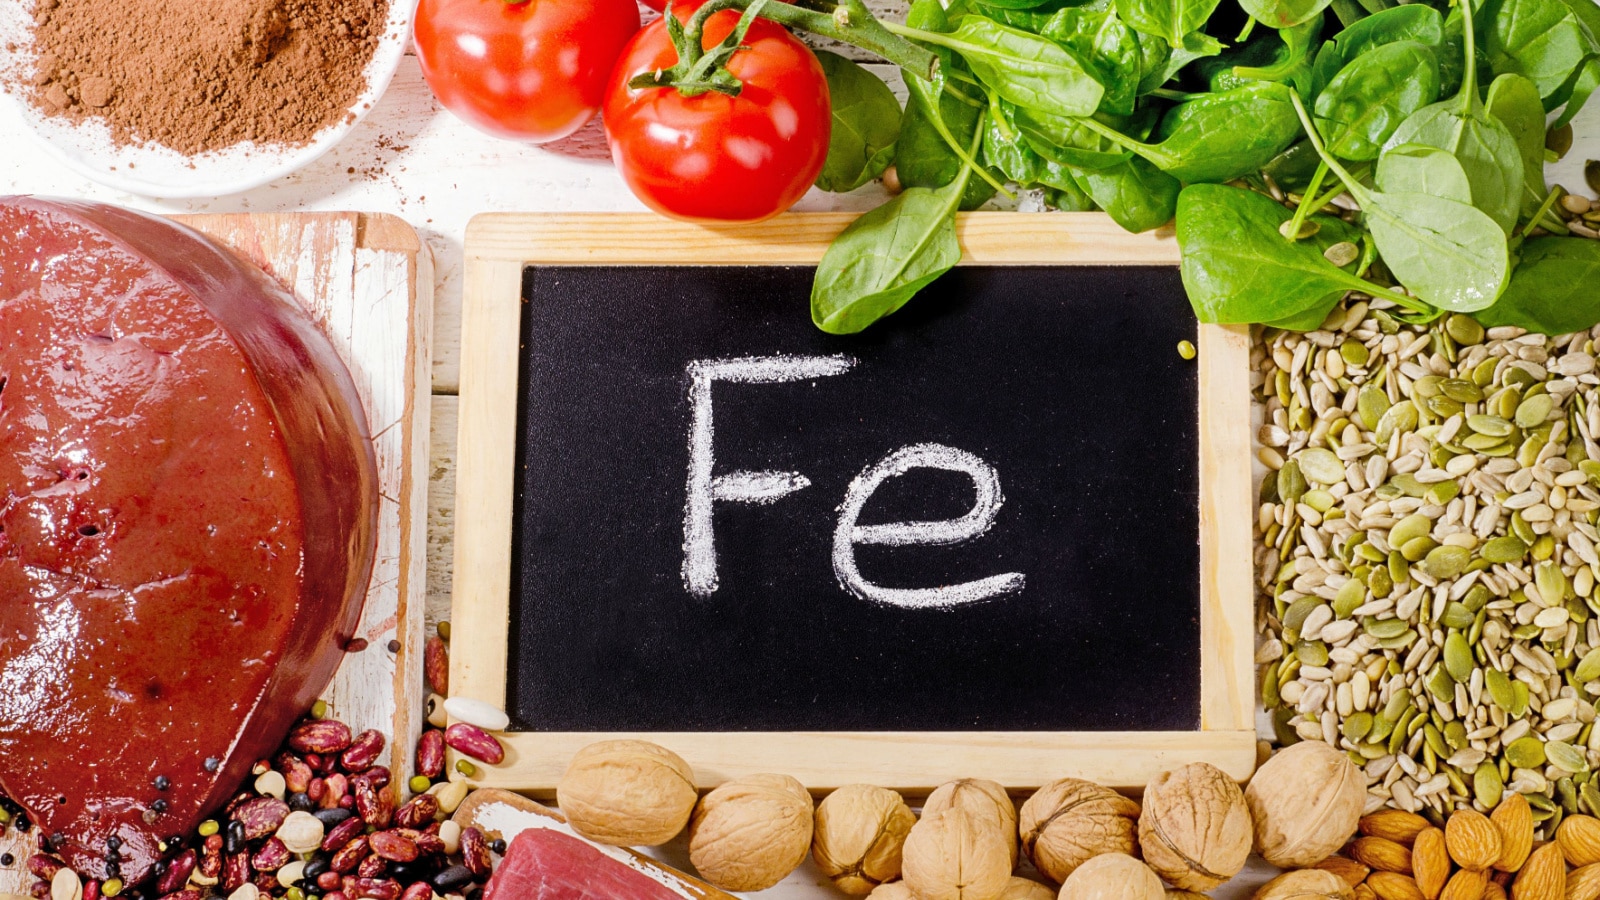 Foods rich in iron. FE symbol.